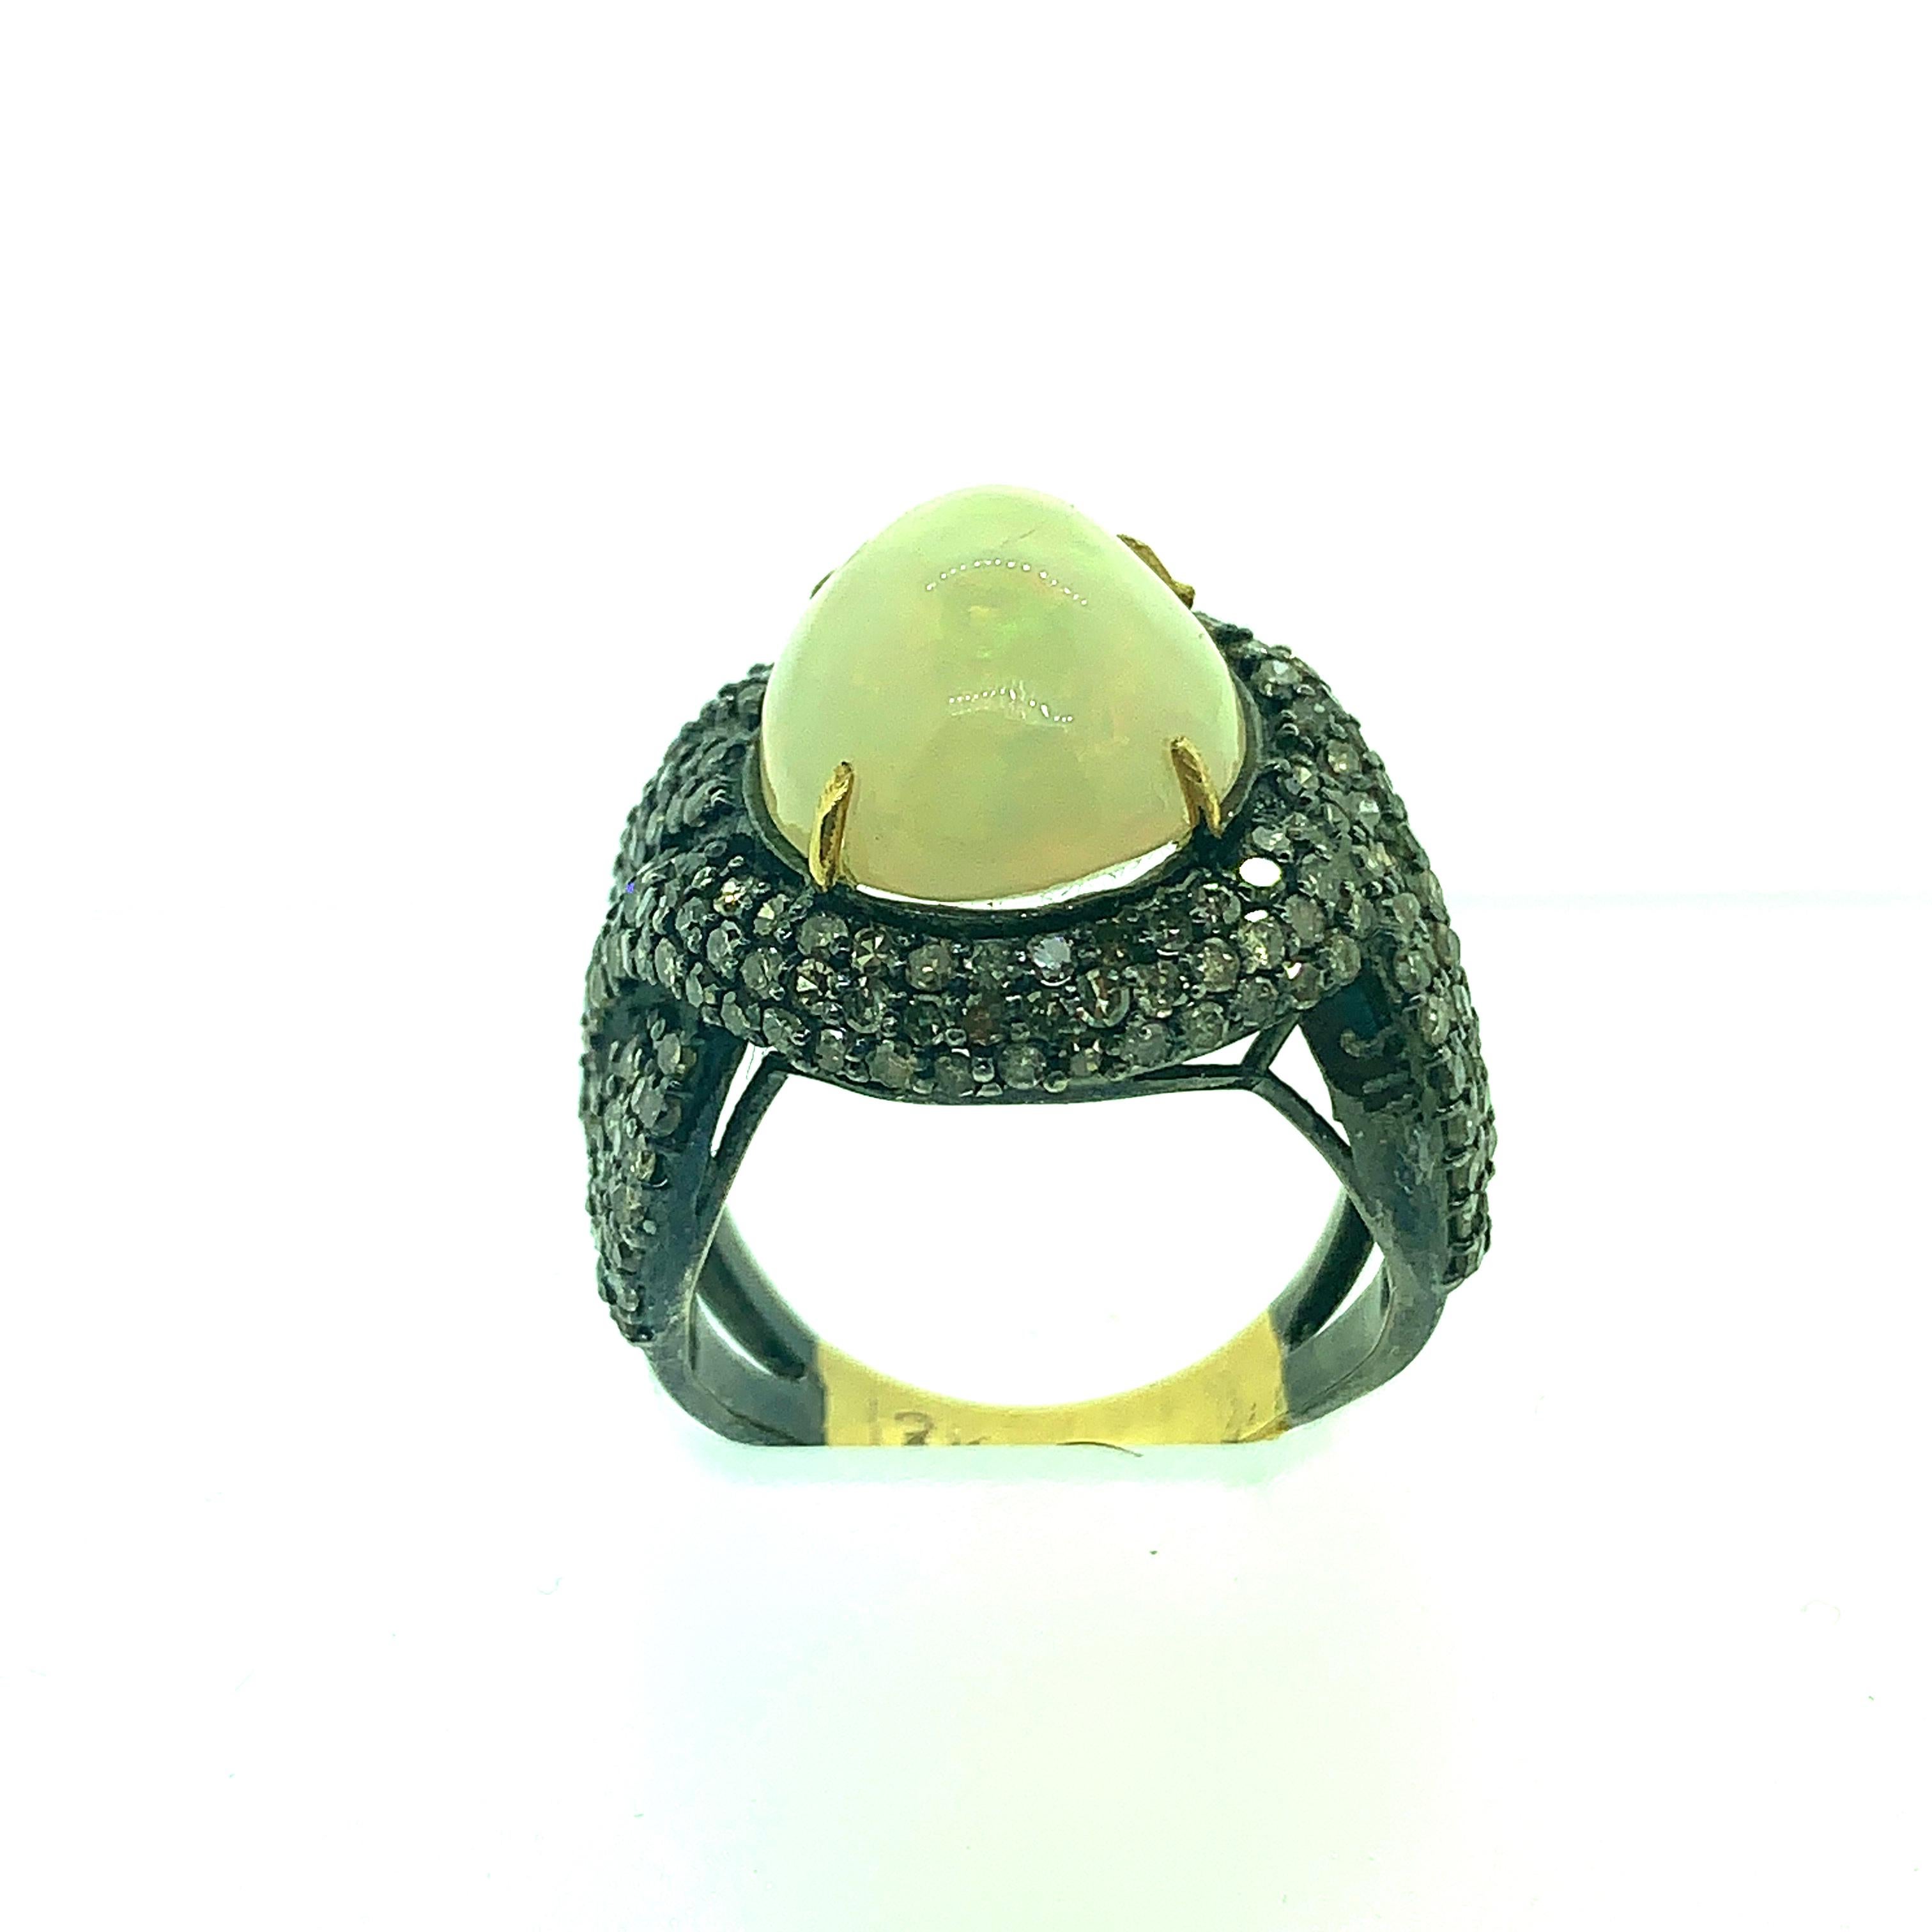 9 Size 6.10 ct Opal and 1.83 ct Champagne Diamond Ring set in Oxidized Sterling Silver with half shank in 18 K Gold. The fire in the opal is good to see with your eyes. The moment the ring touches the skin the fire in the opal can be seen